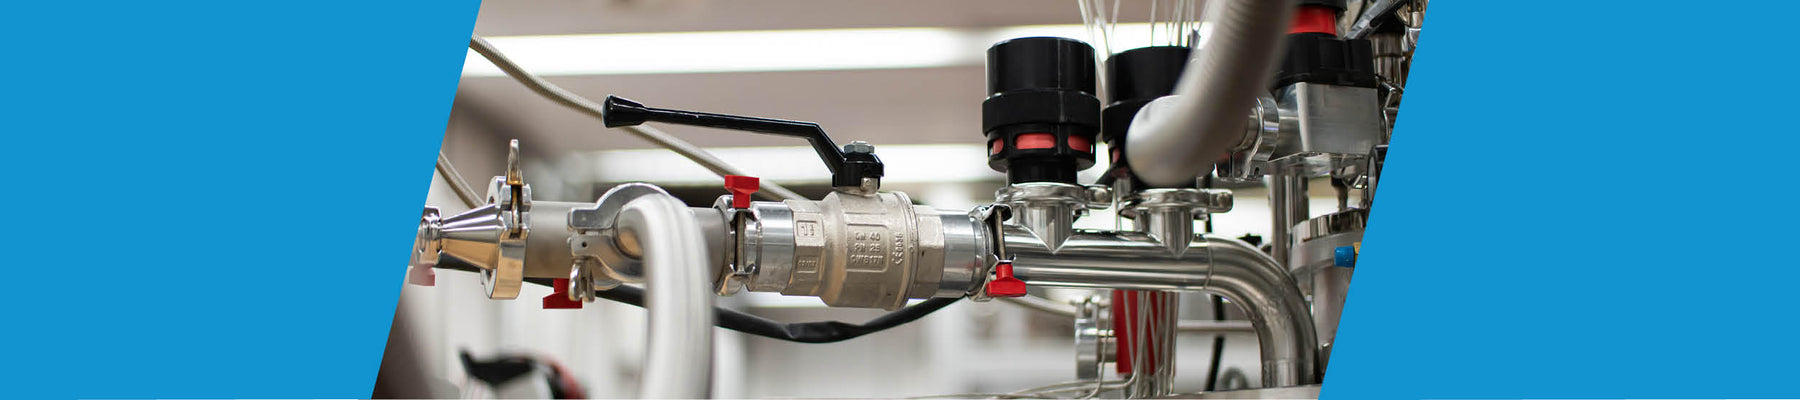 Precision and Reliability: Oval Gear Meters in Chemical Injection Rigs